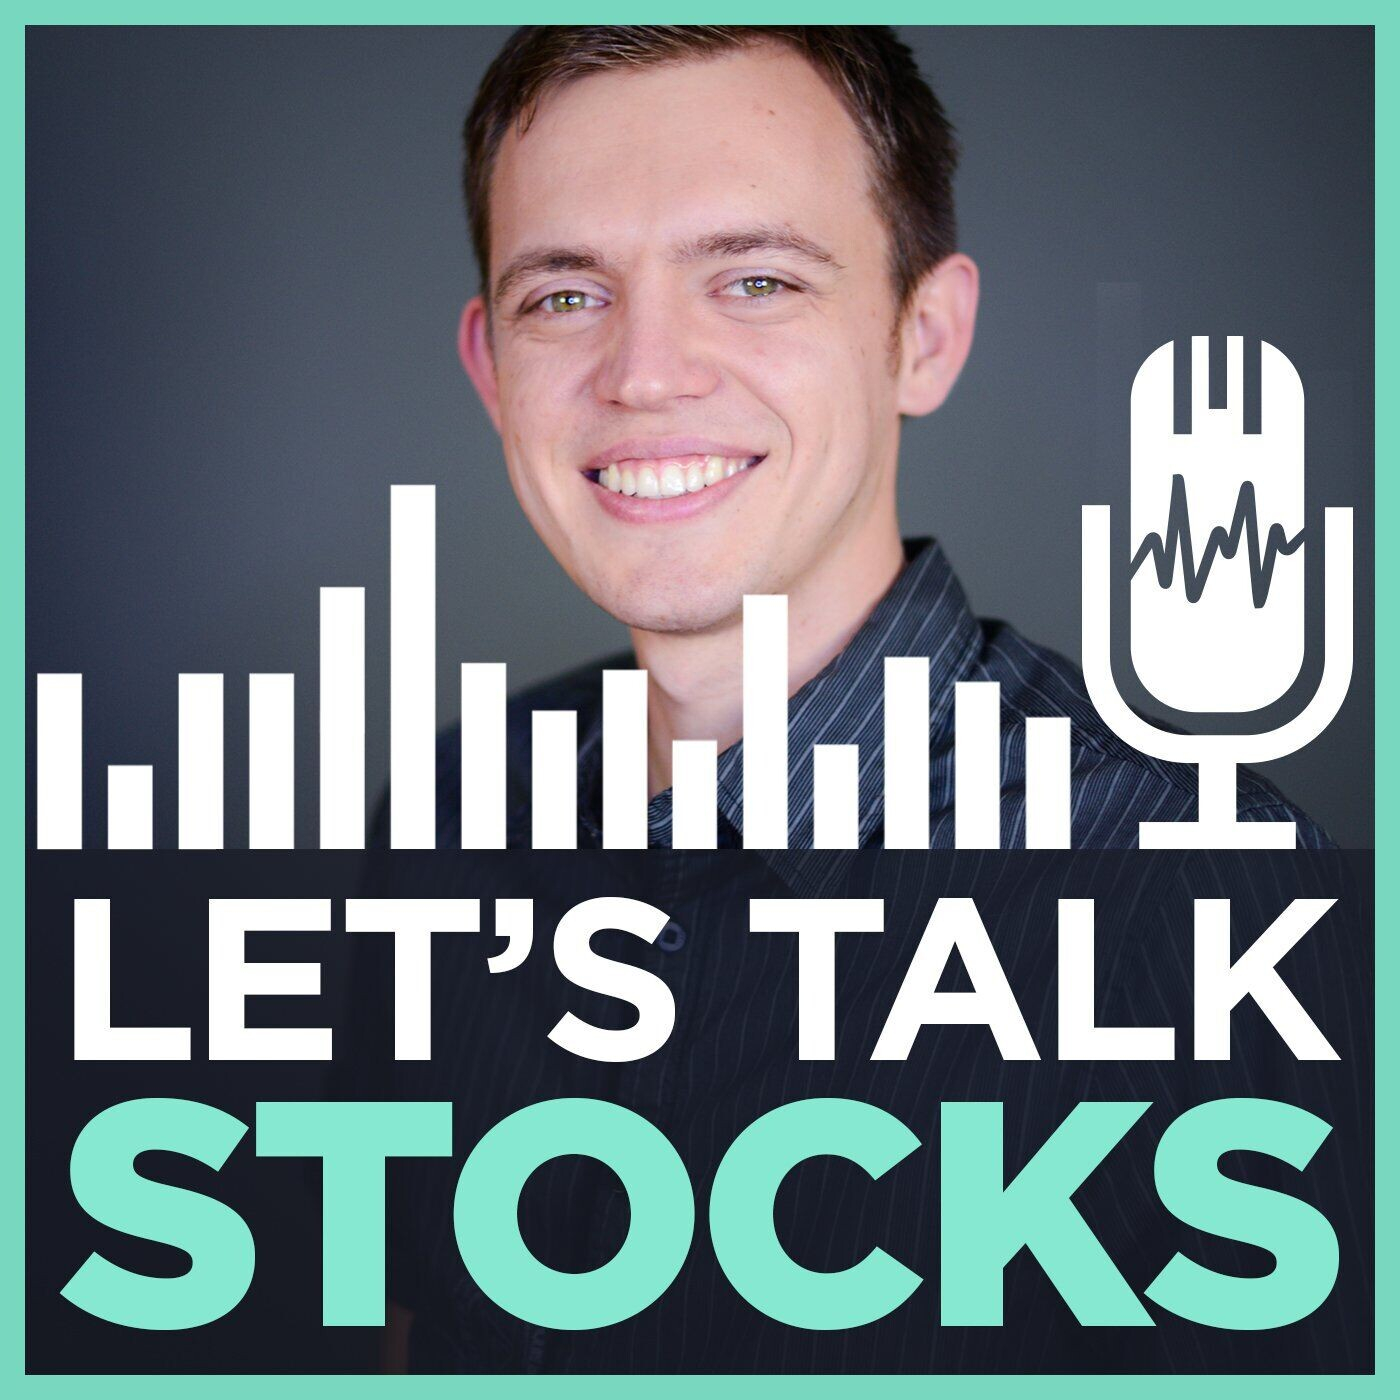 5 Lazy Ways to Be Invested - For the Lazy Stock Trader Ep 241